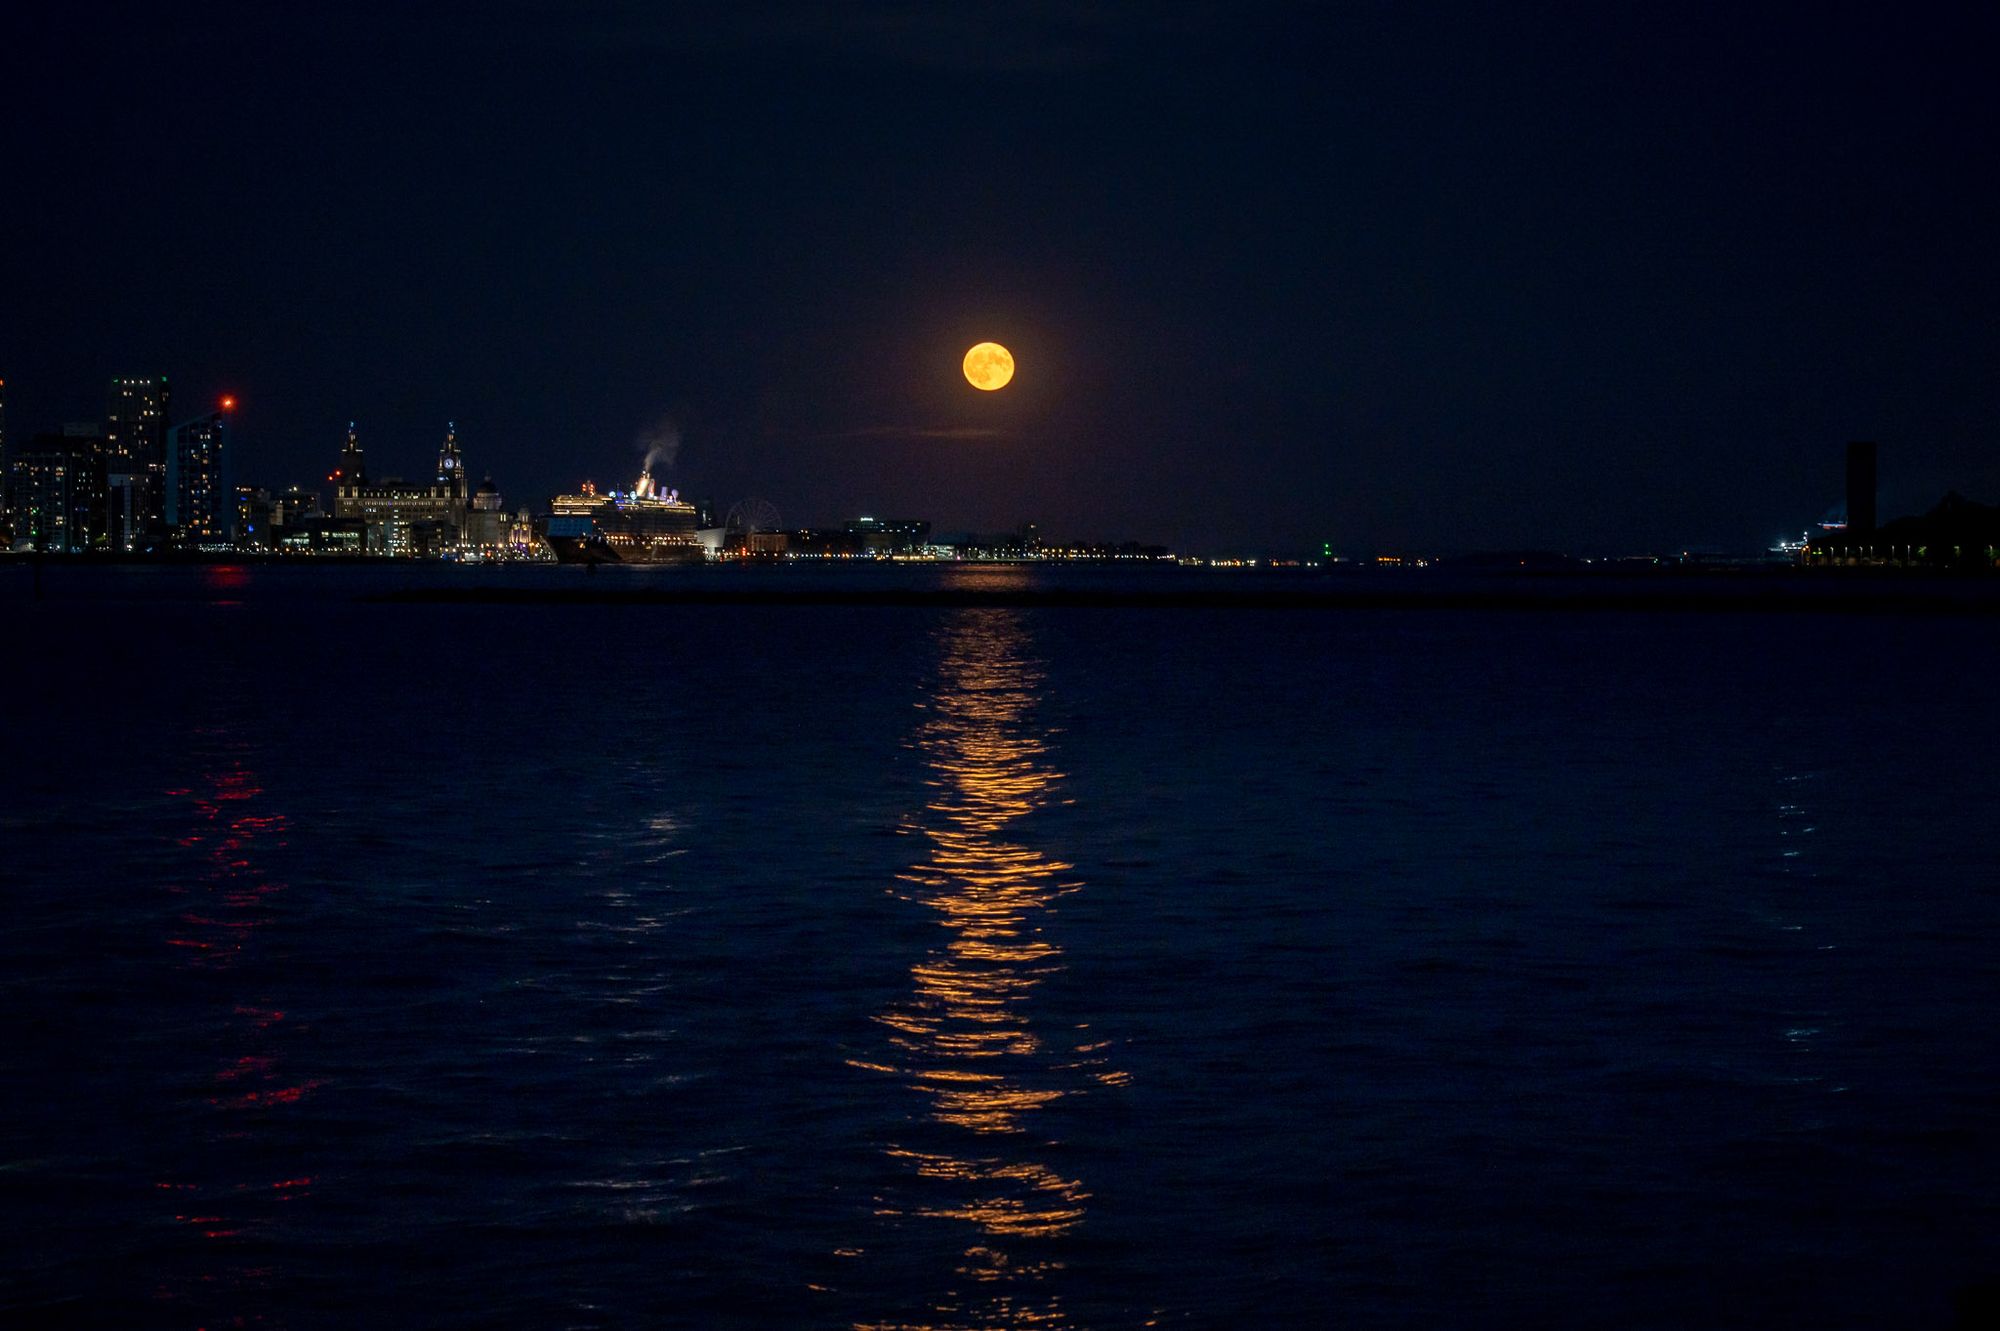 A Strawberry super moon rises to the over the River Mersey with the city of Liverpool to the left.